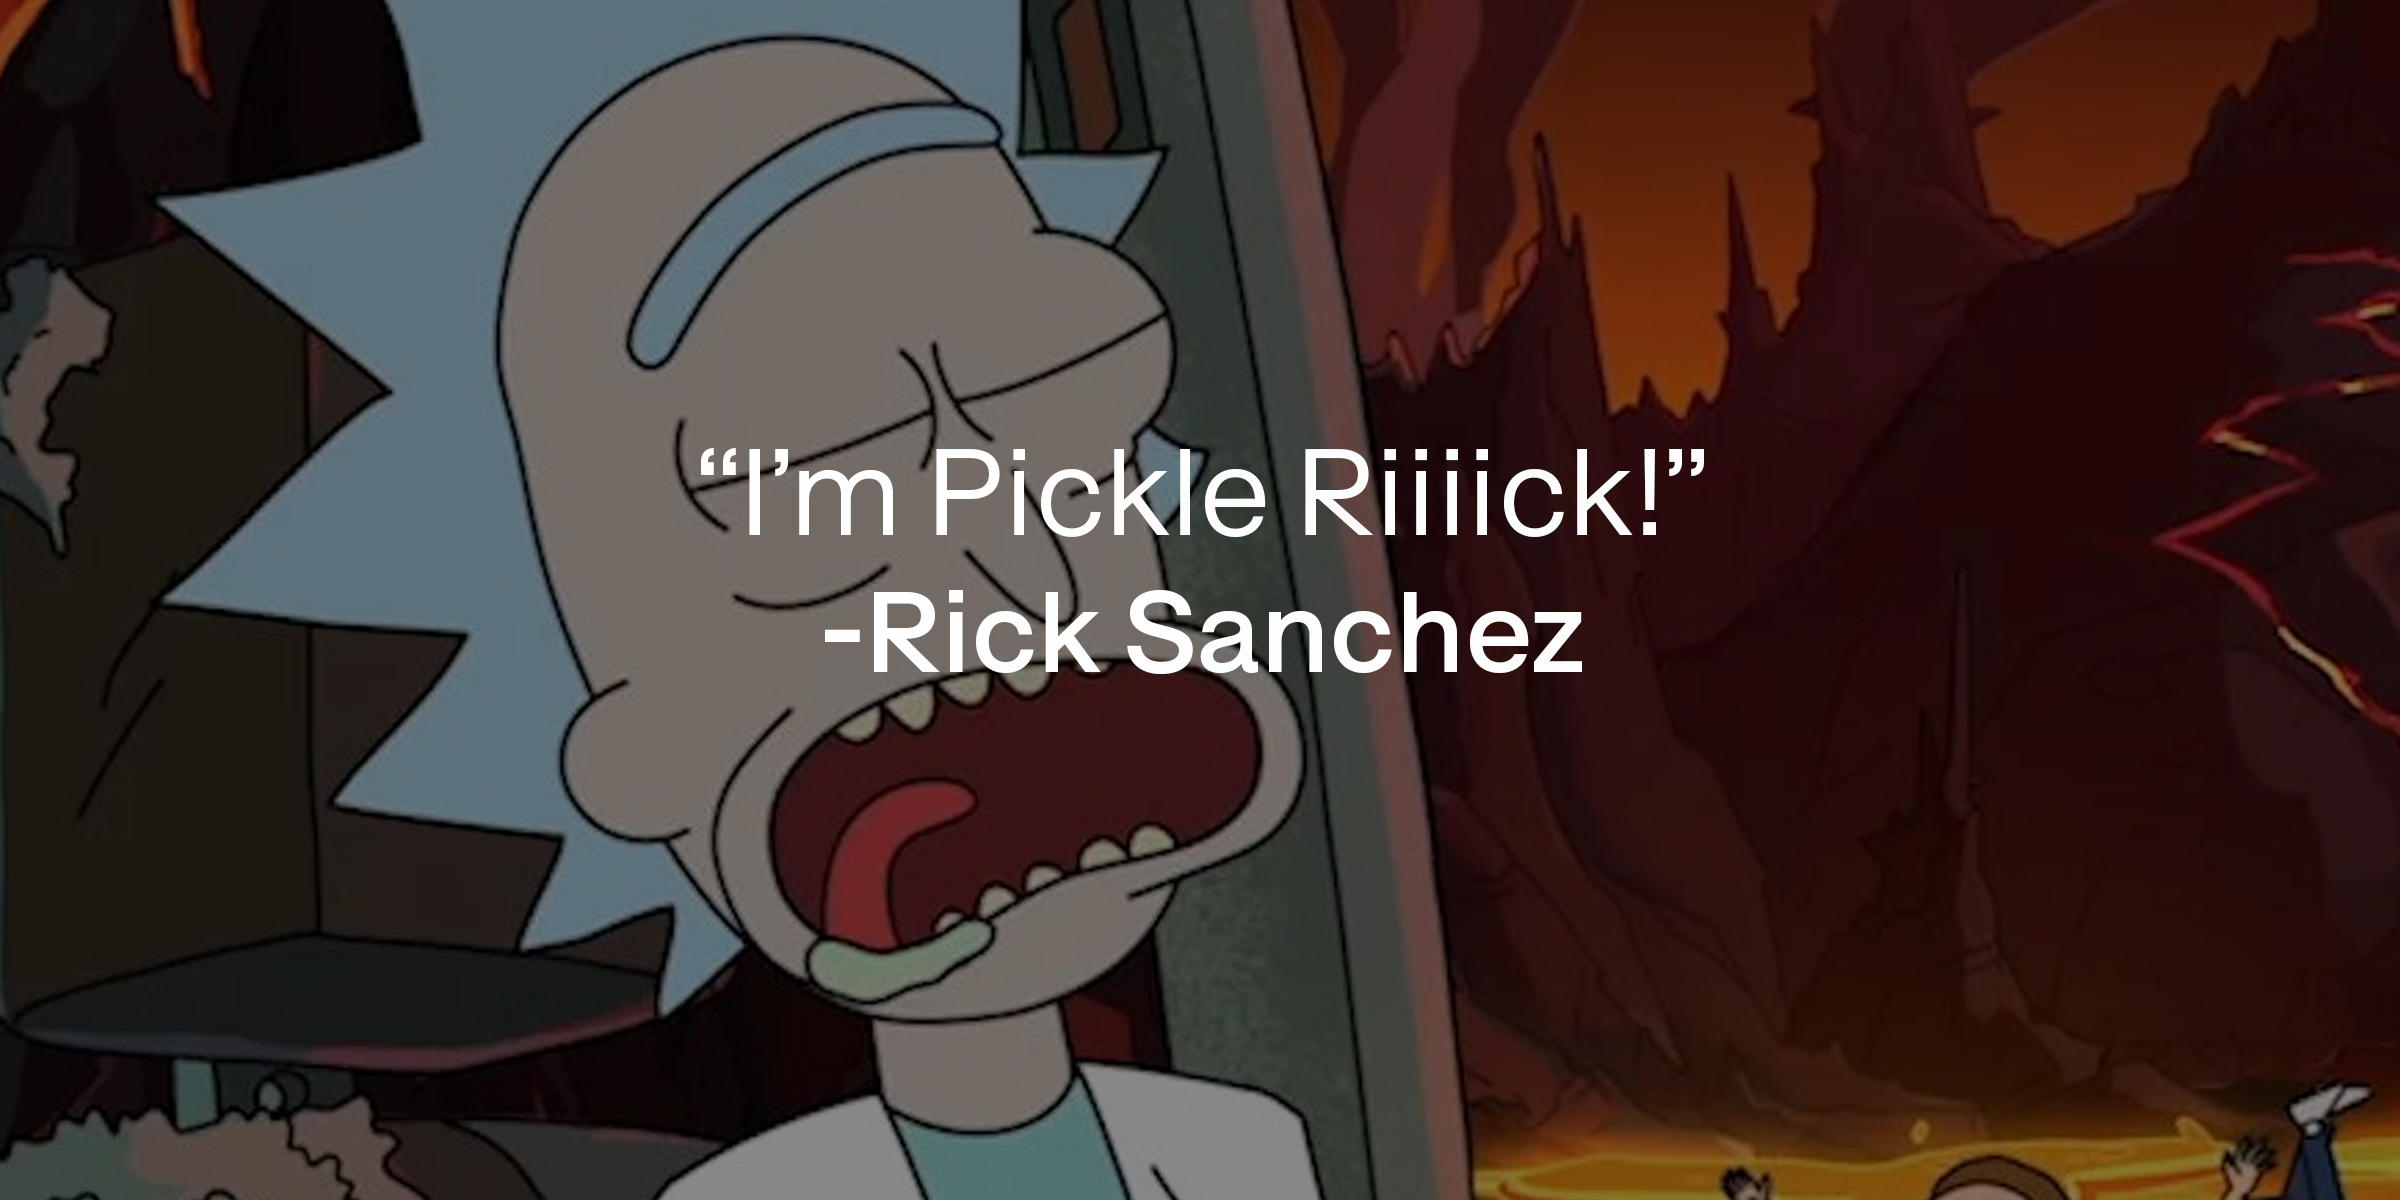 An image of Rick Sanchez with his quote: “I’m Pickle Riiiick!" | Source: Facebook.com/RickandMorty